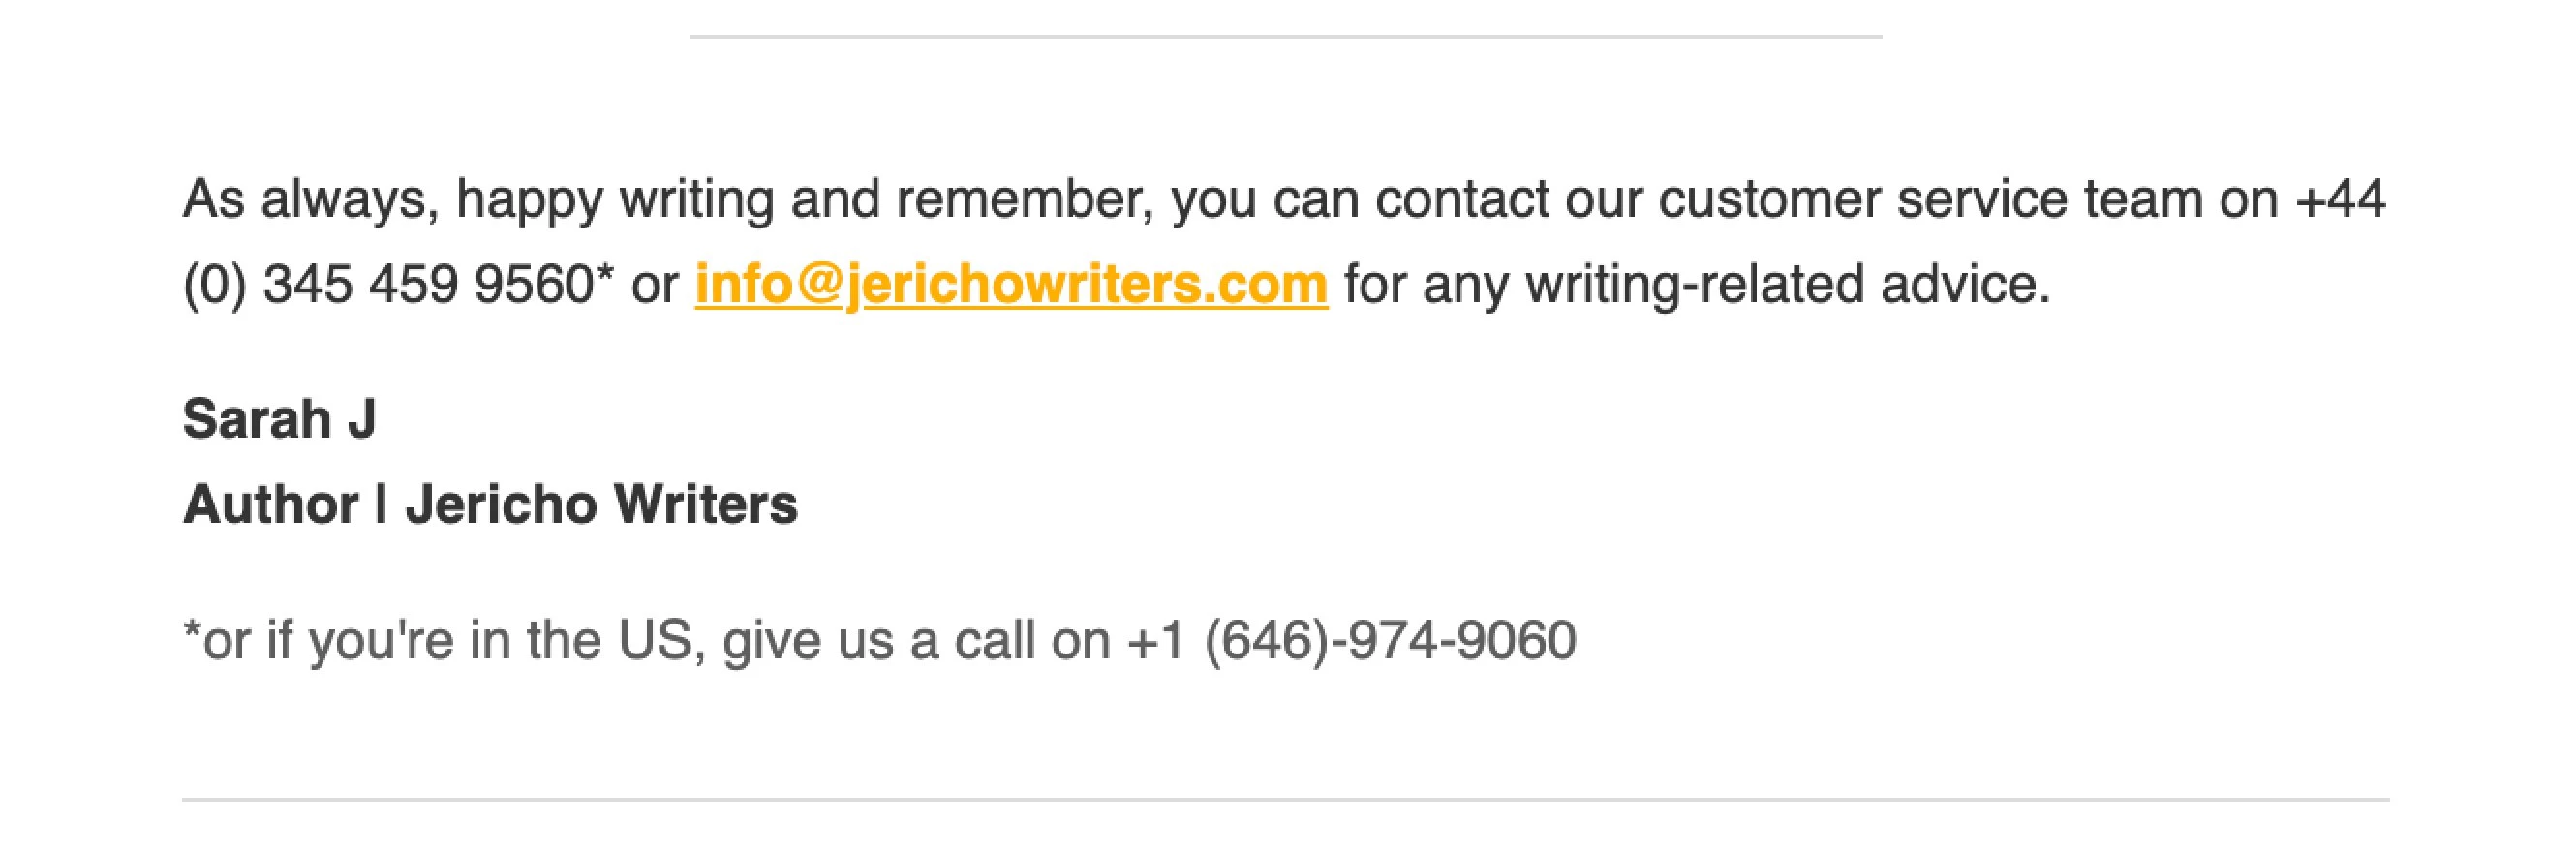 Jericho Writers email sign-off example contact information